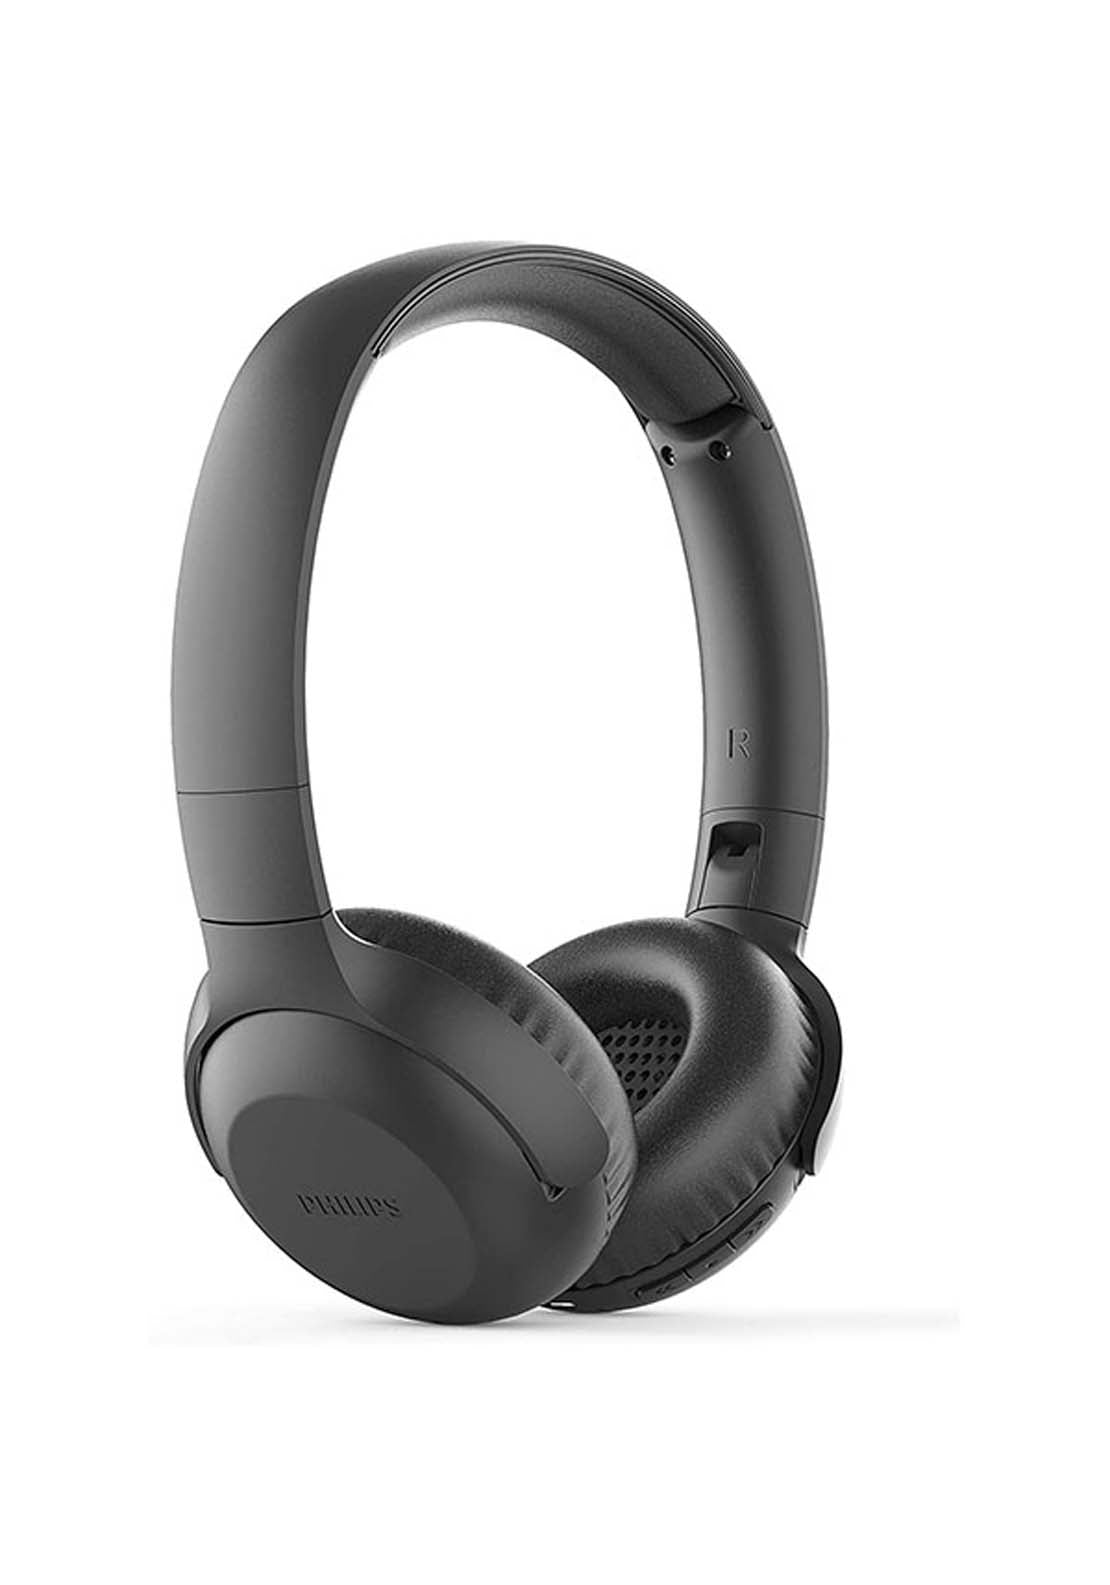 Philips On-Ear Bt Headphones | Tauh202Bk00 1 Shaws Department Stores